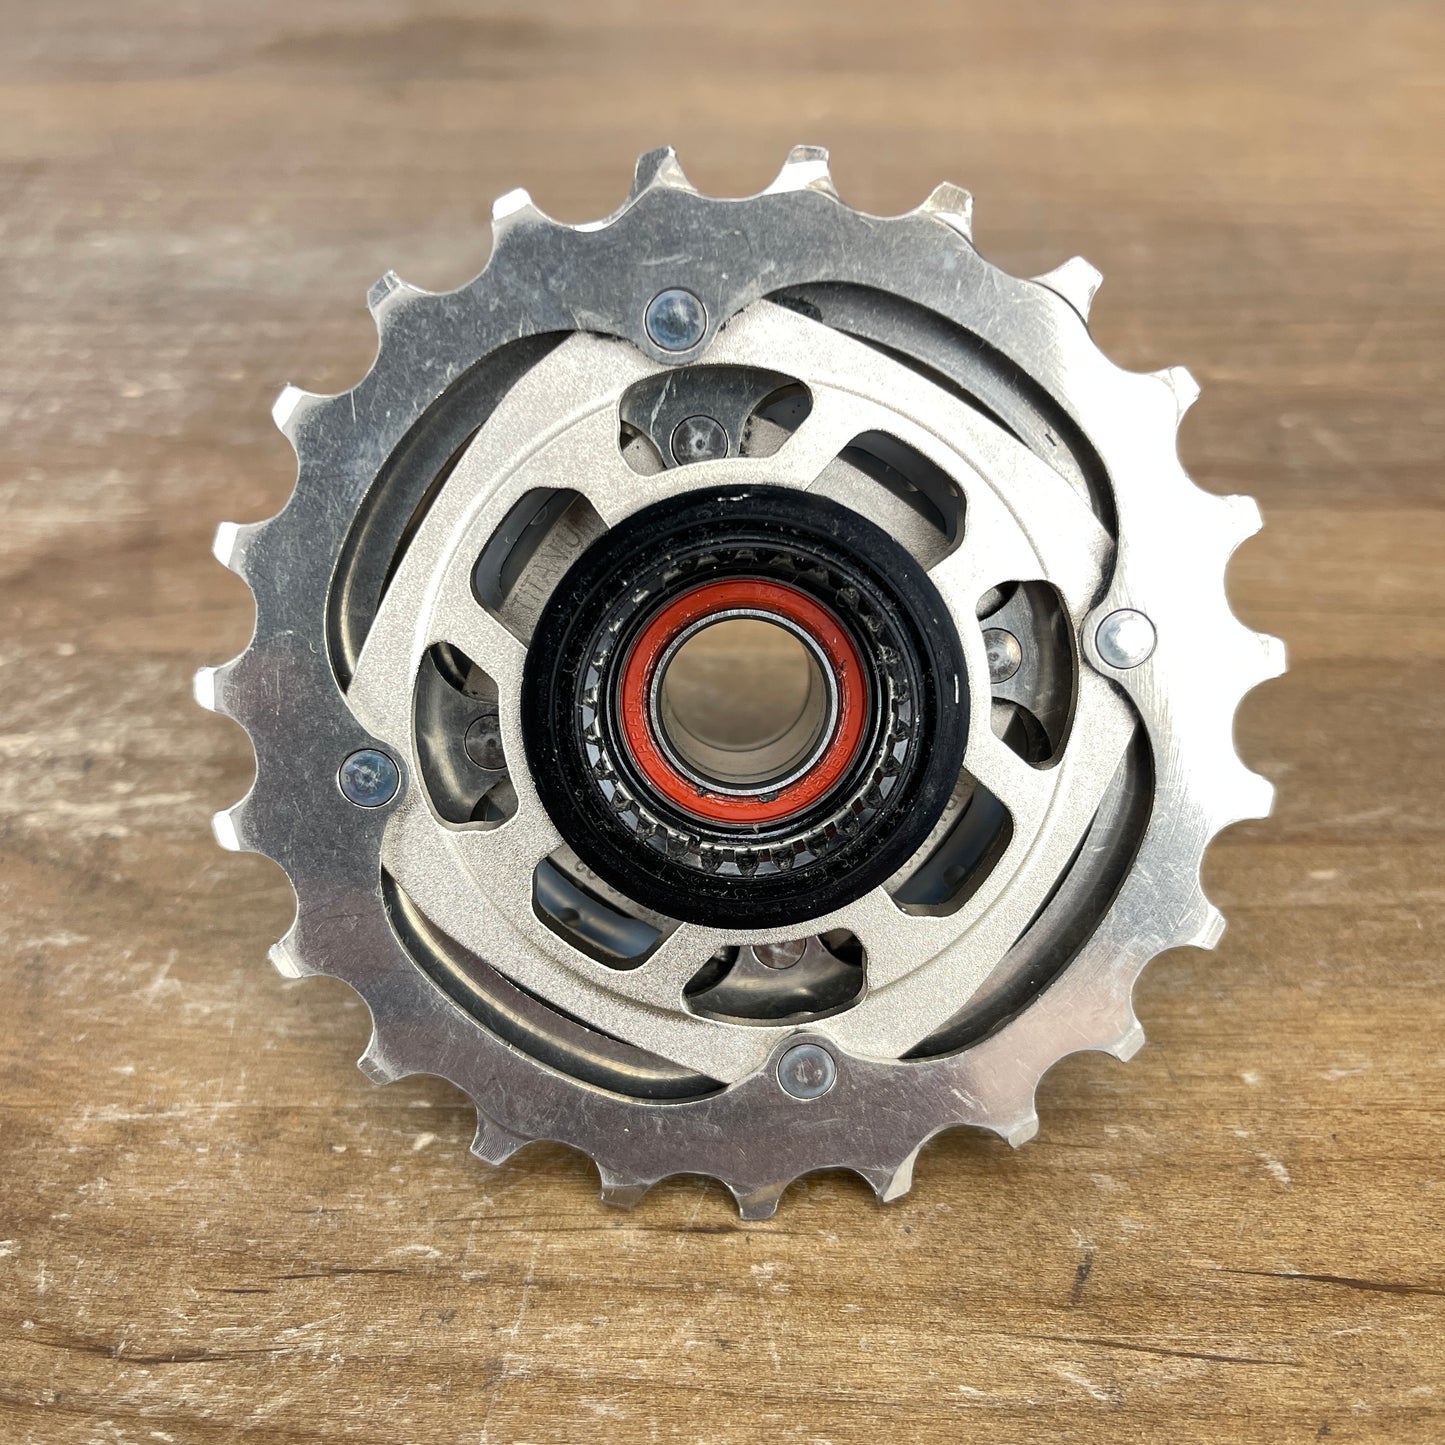 Campagnolo Record 10-Speed 12-23t Road Bike Cassette "Typical Wear" 201g